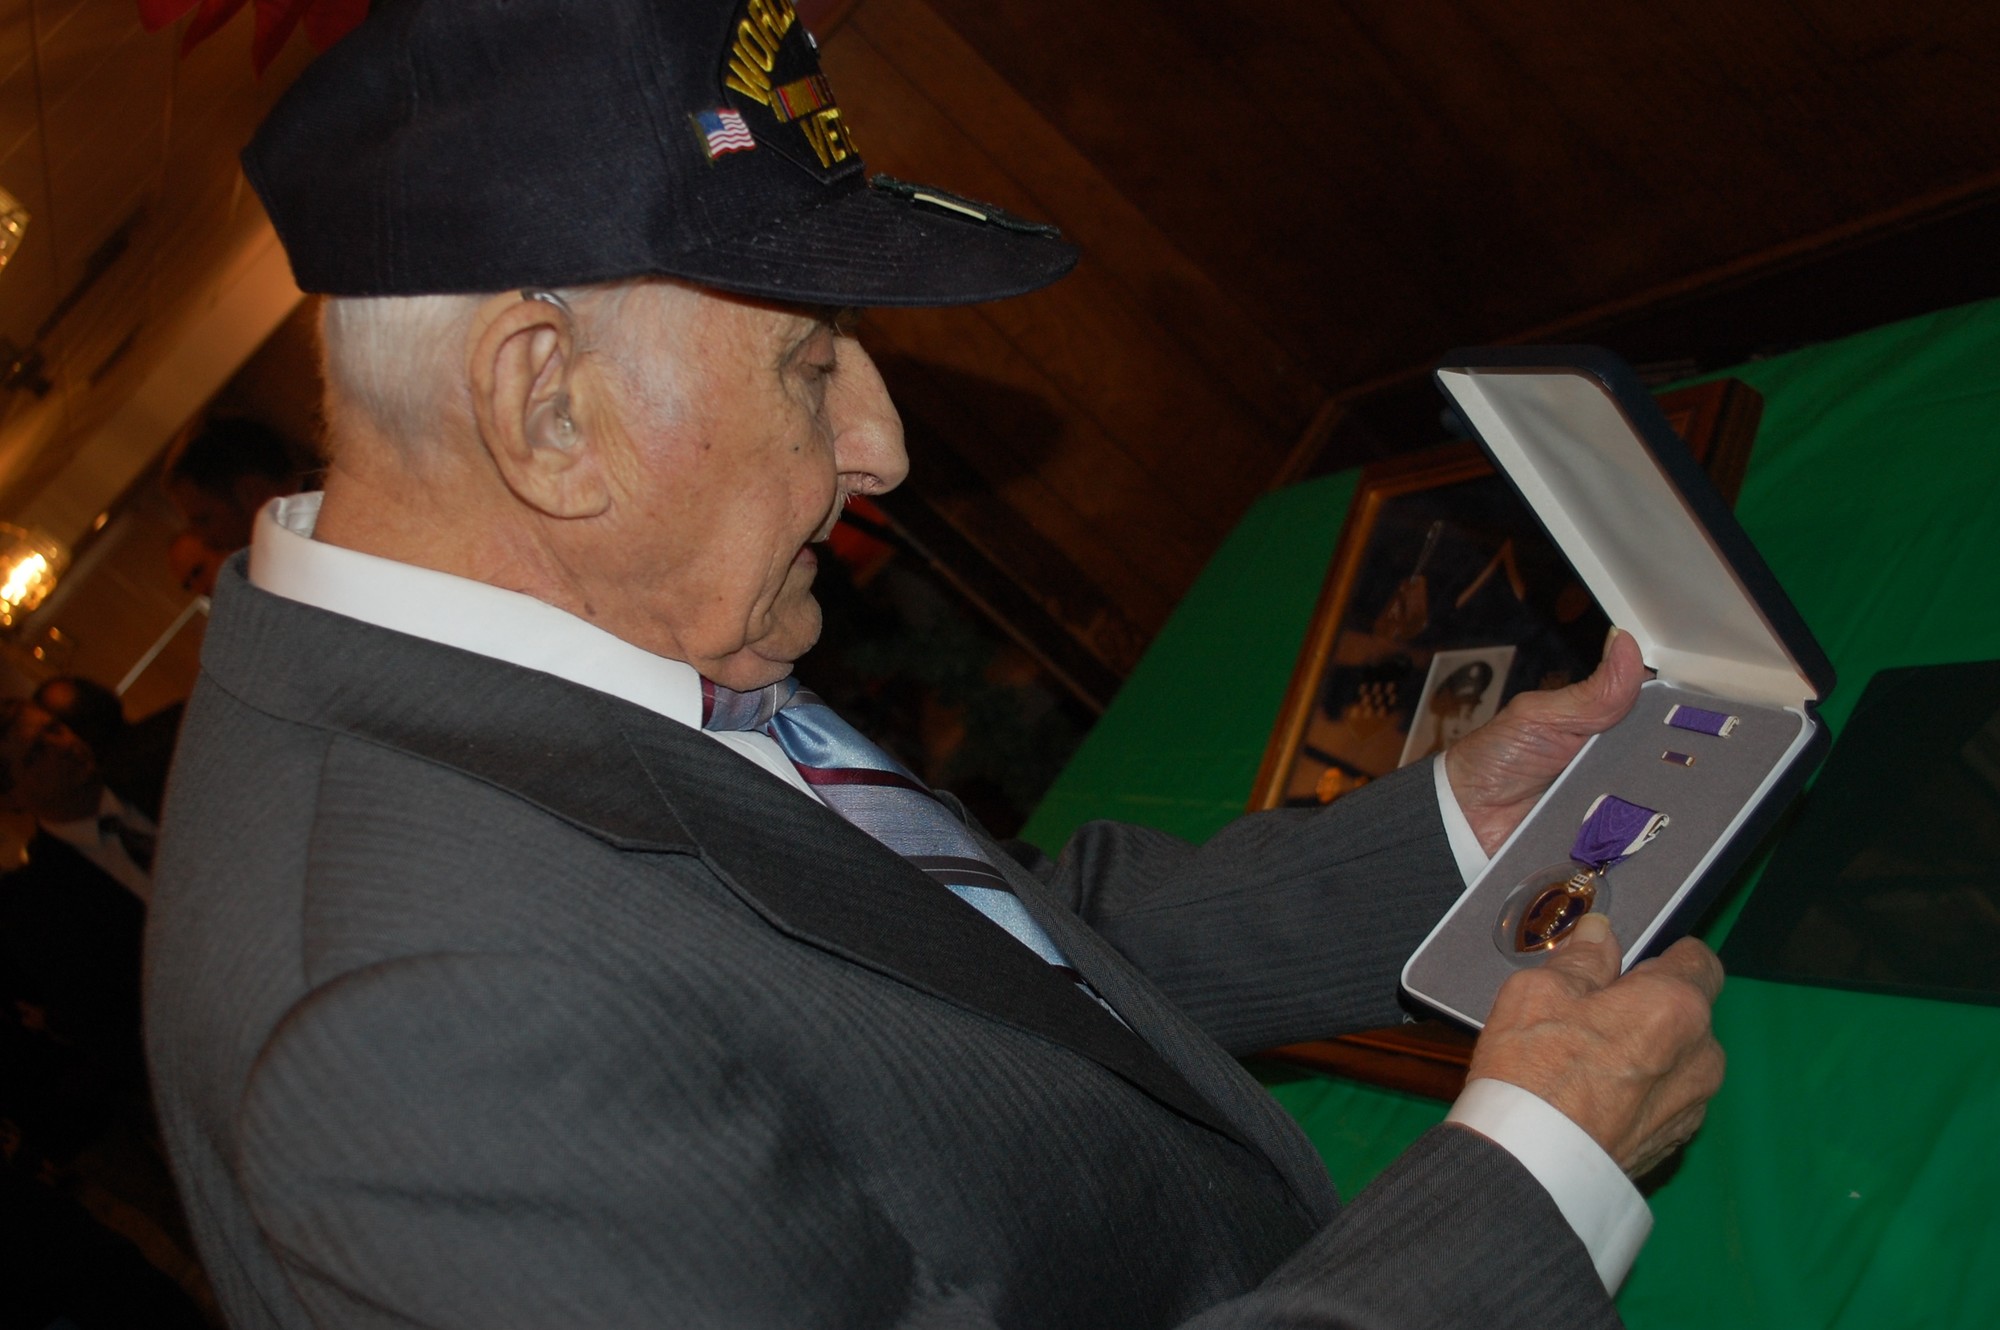 Leonard Stern admired the Purple Heart he was awarded at the Wantagh American Legion Hall on Monday by U.S. Sen. Kirsten Gillibrand.